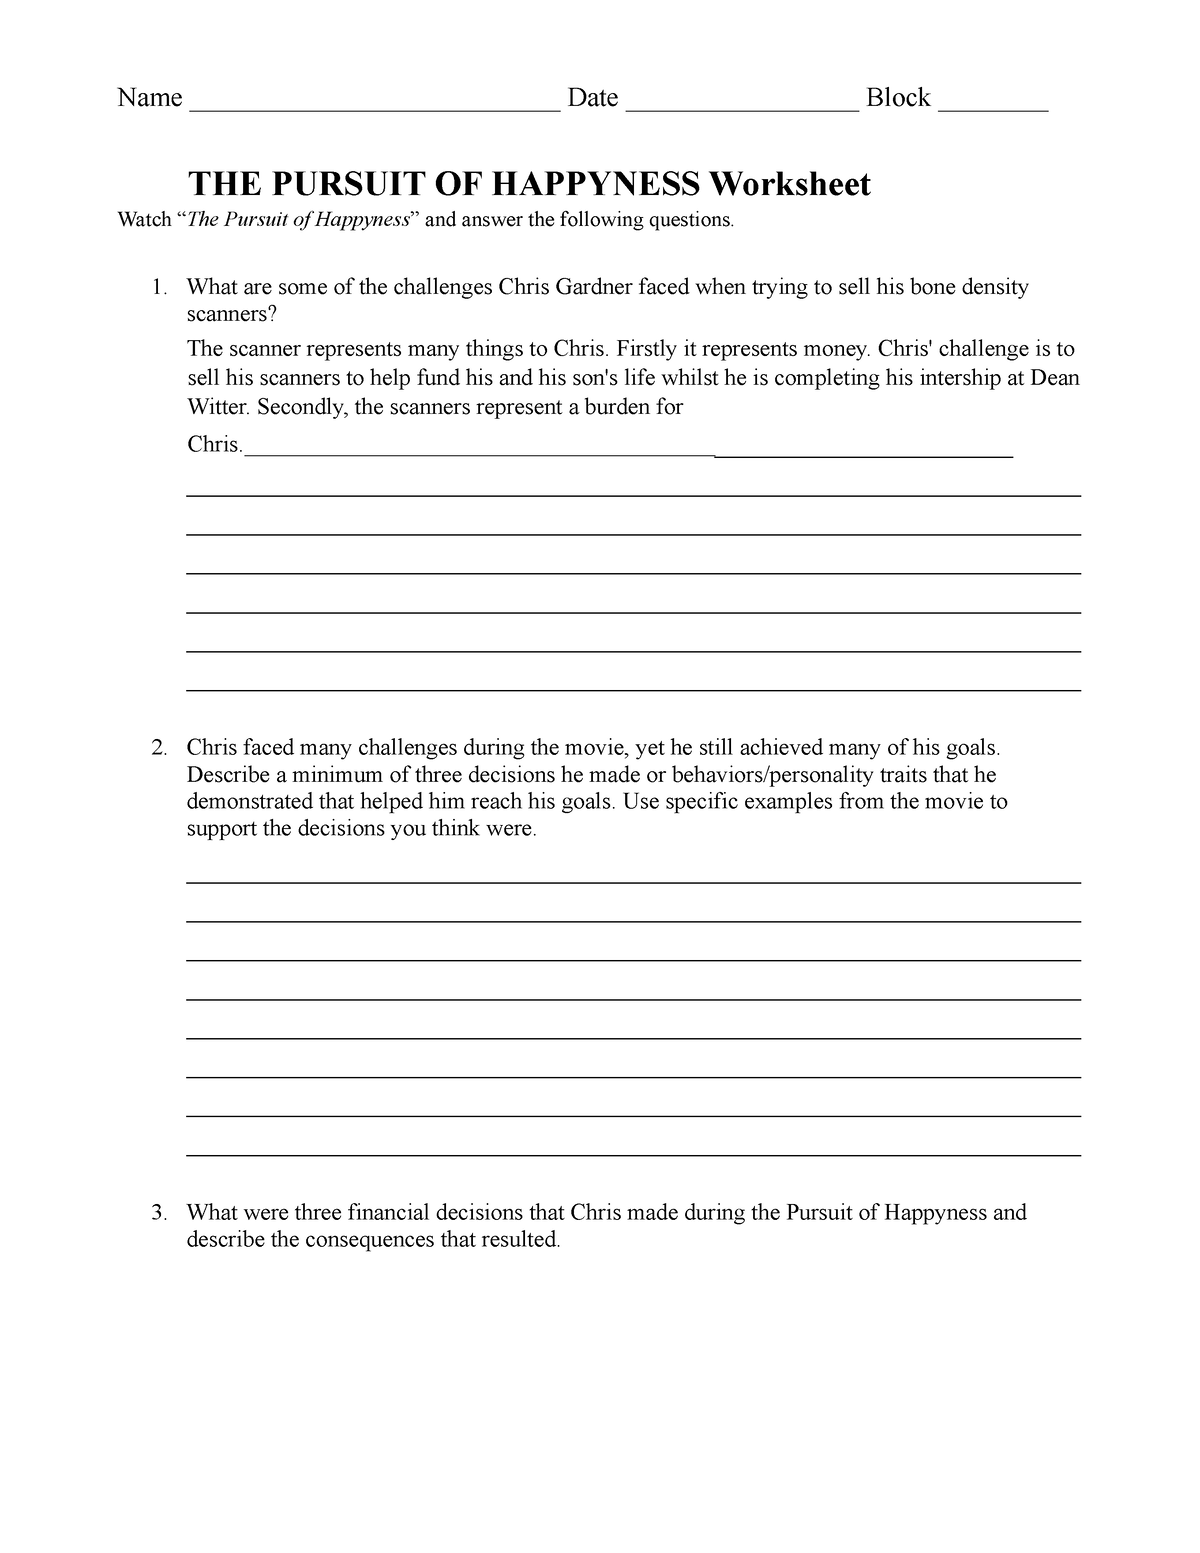 Pursuit of Happyness Worksheet 2 Name